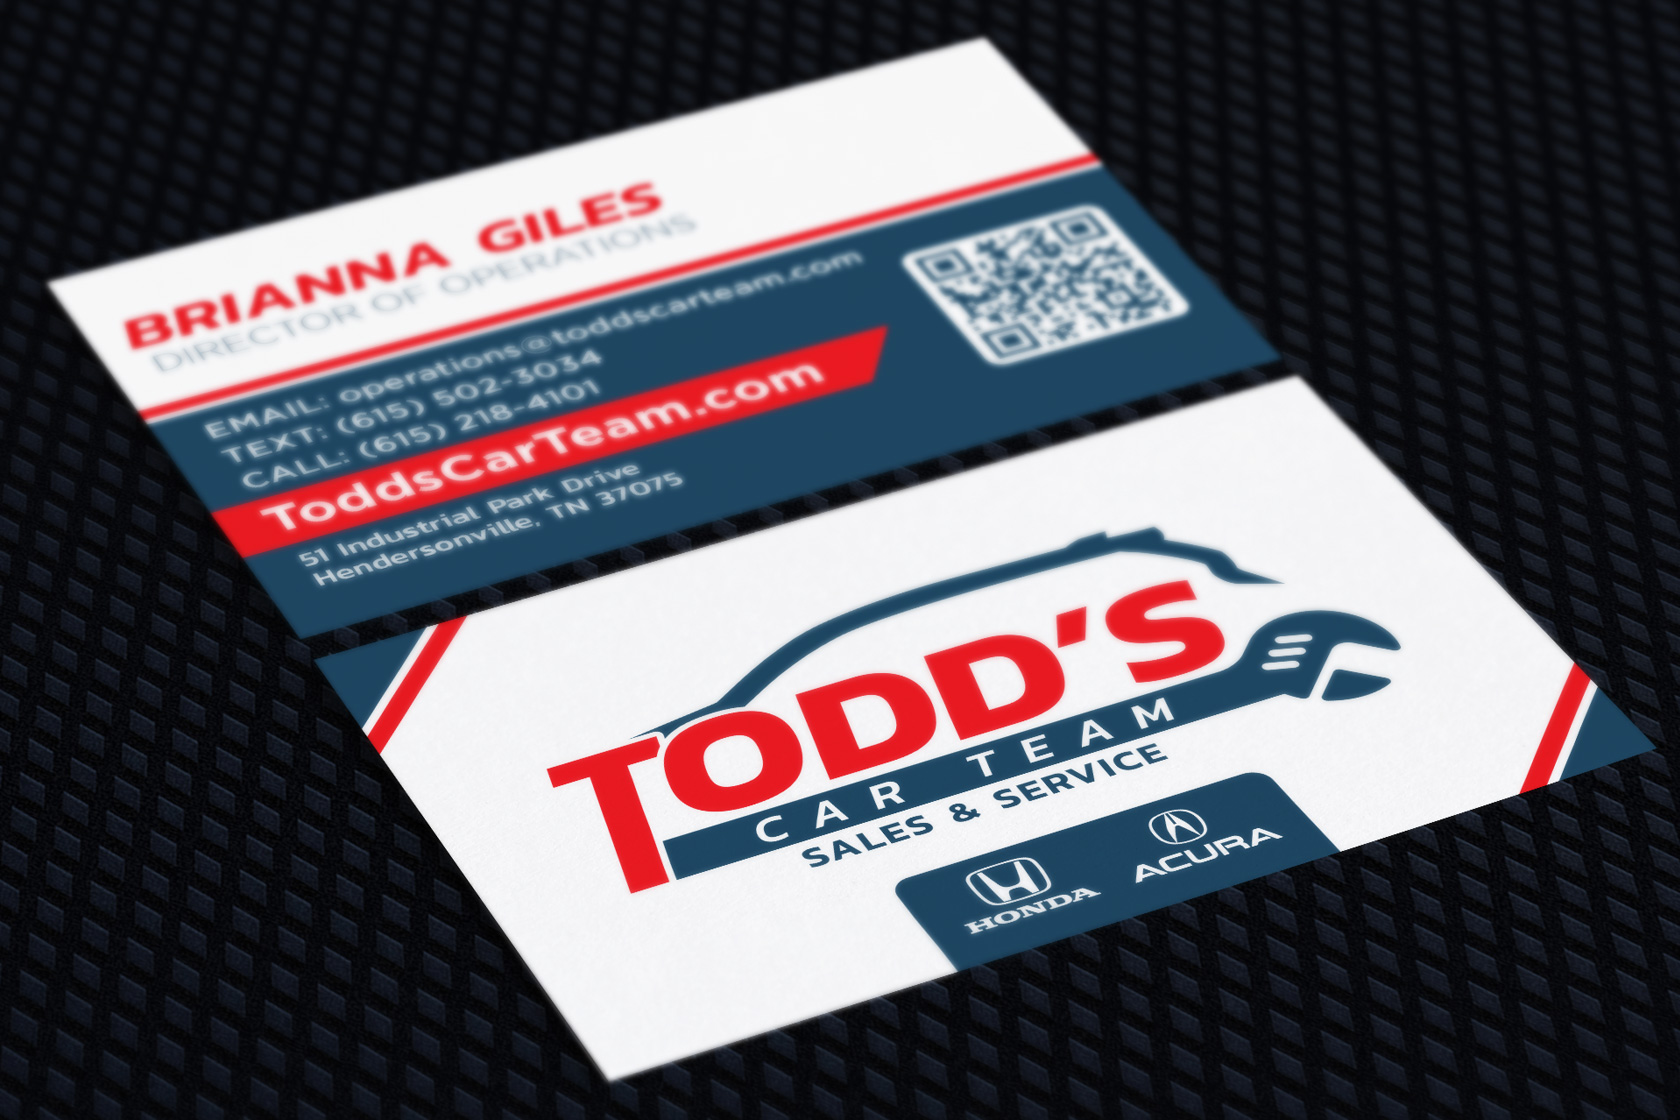 Todd's Car Team Business Card on a metal surface